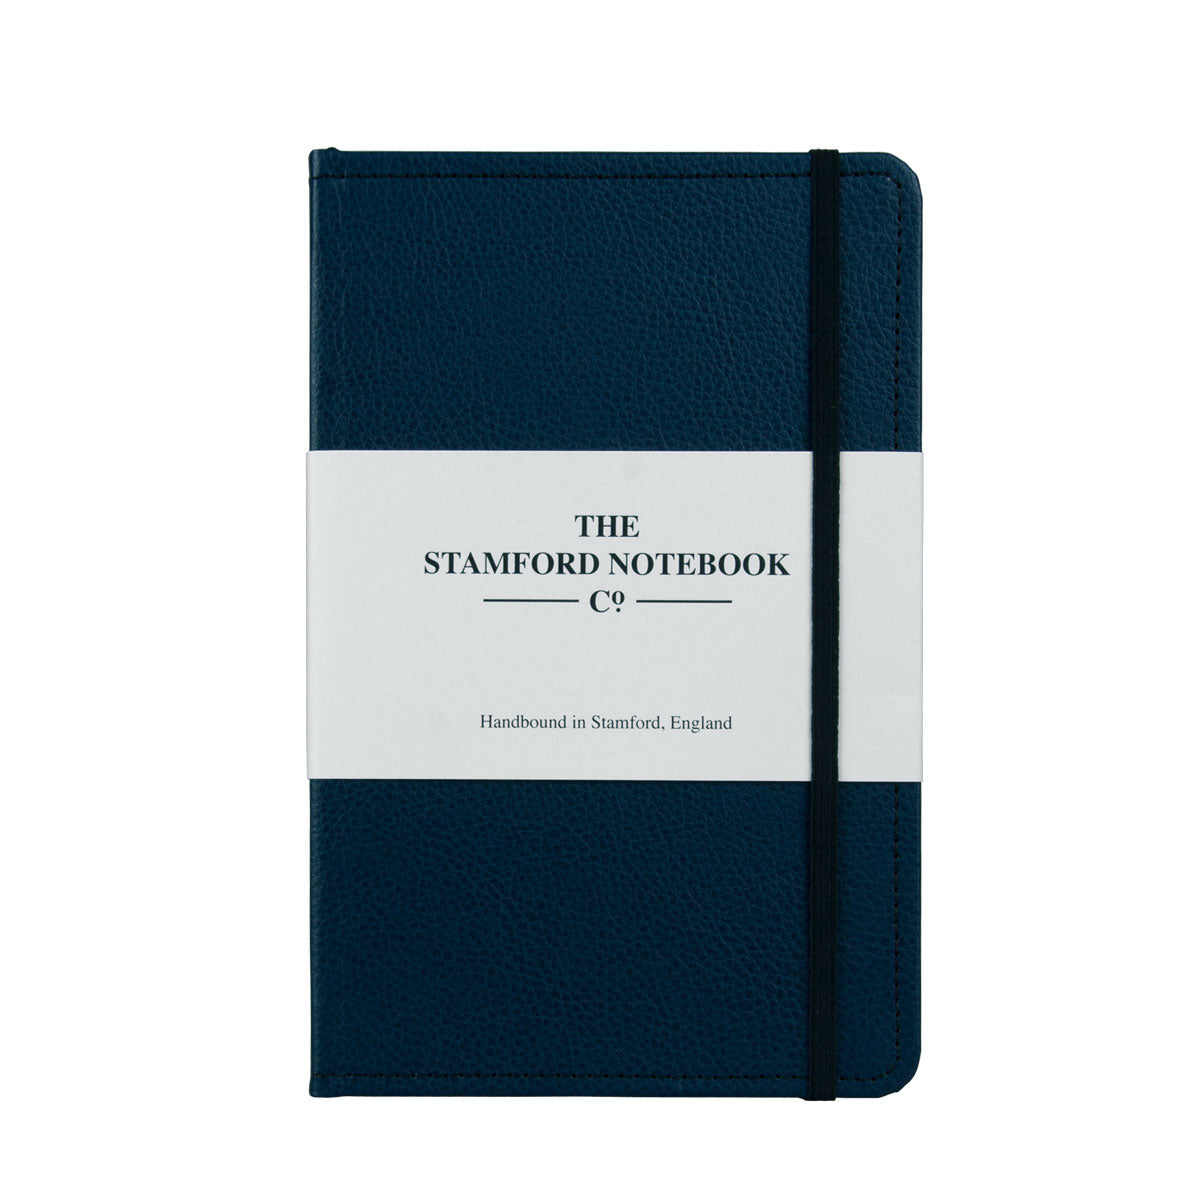 Marine Blue leather notebook with black stitching